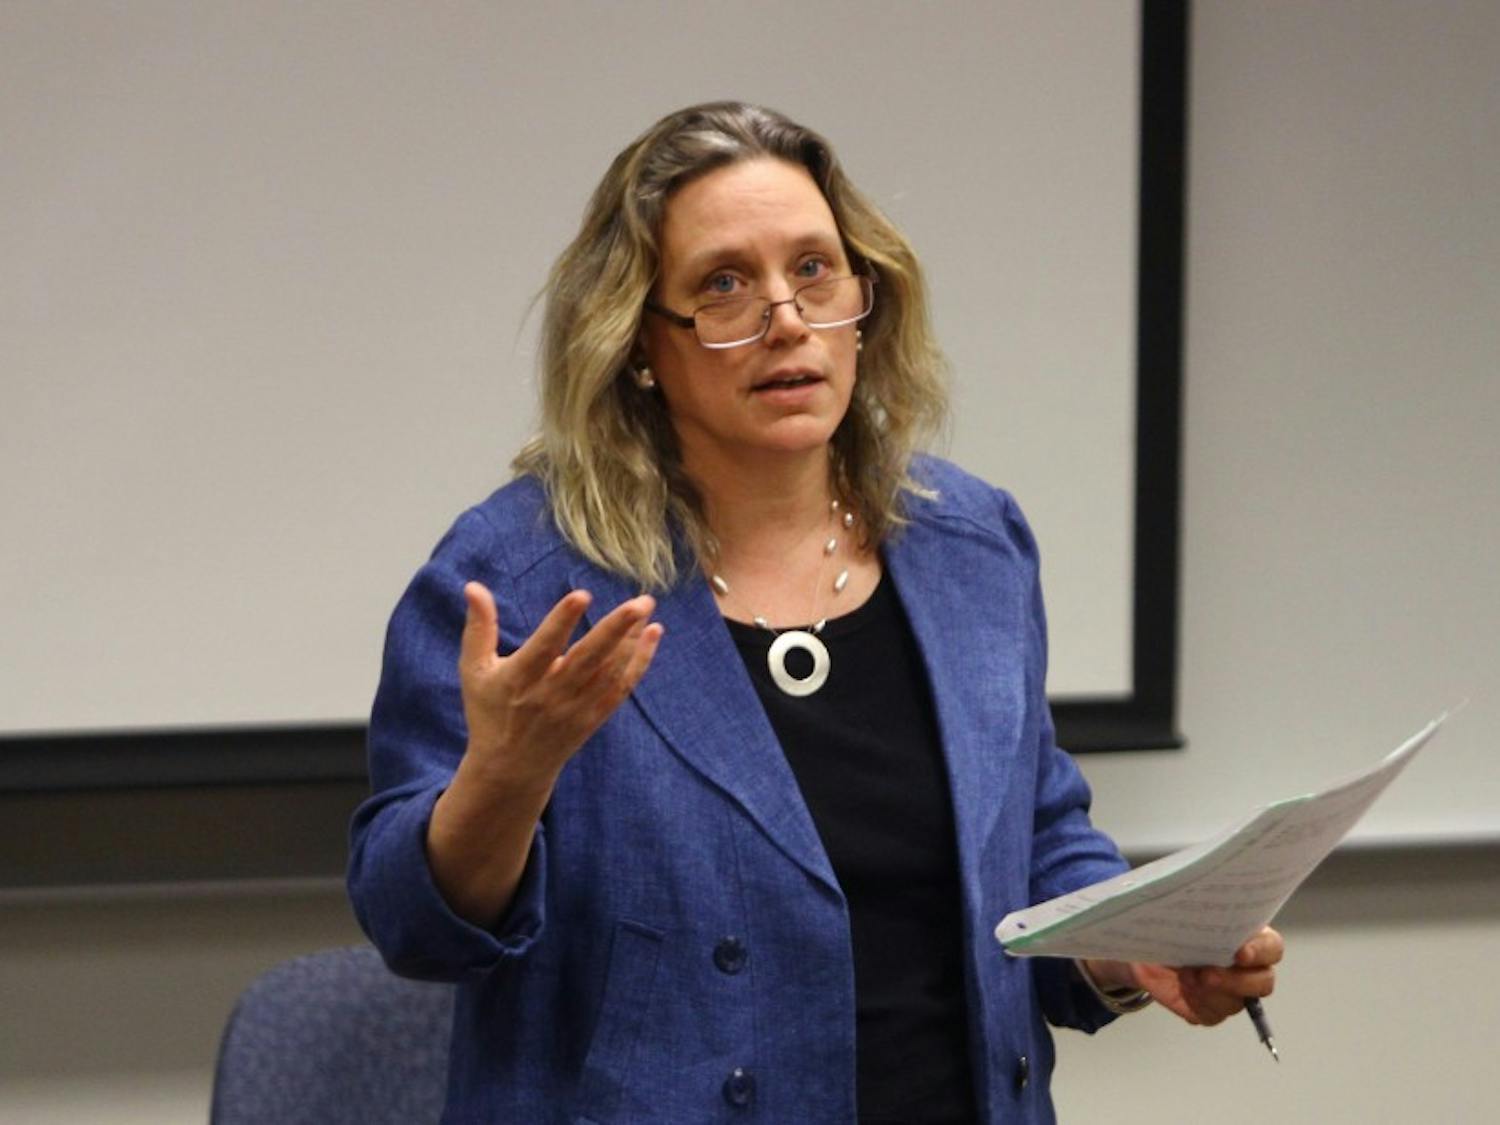 Dean Laurie Patton explained the senior lecturer role to the Academic Council on Thursday afternoon.